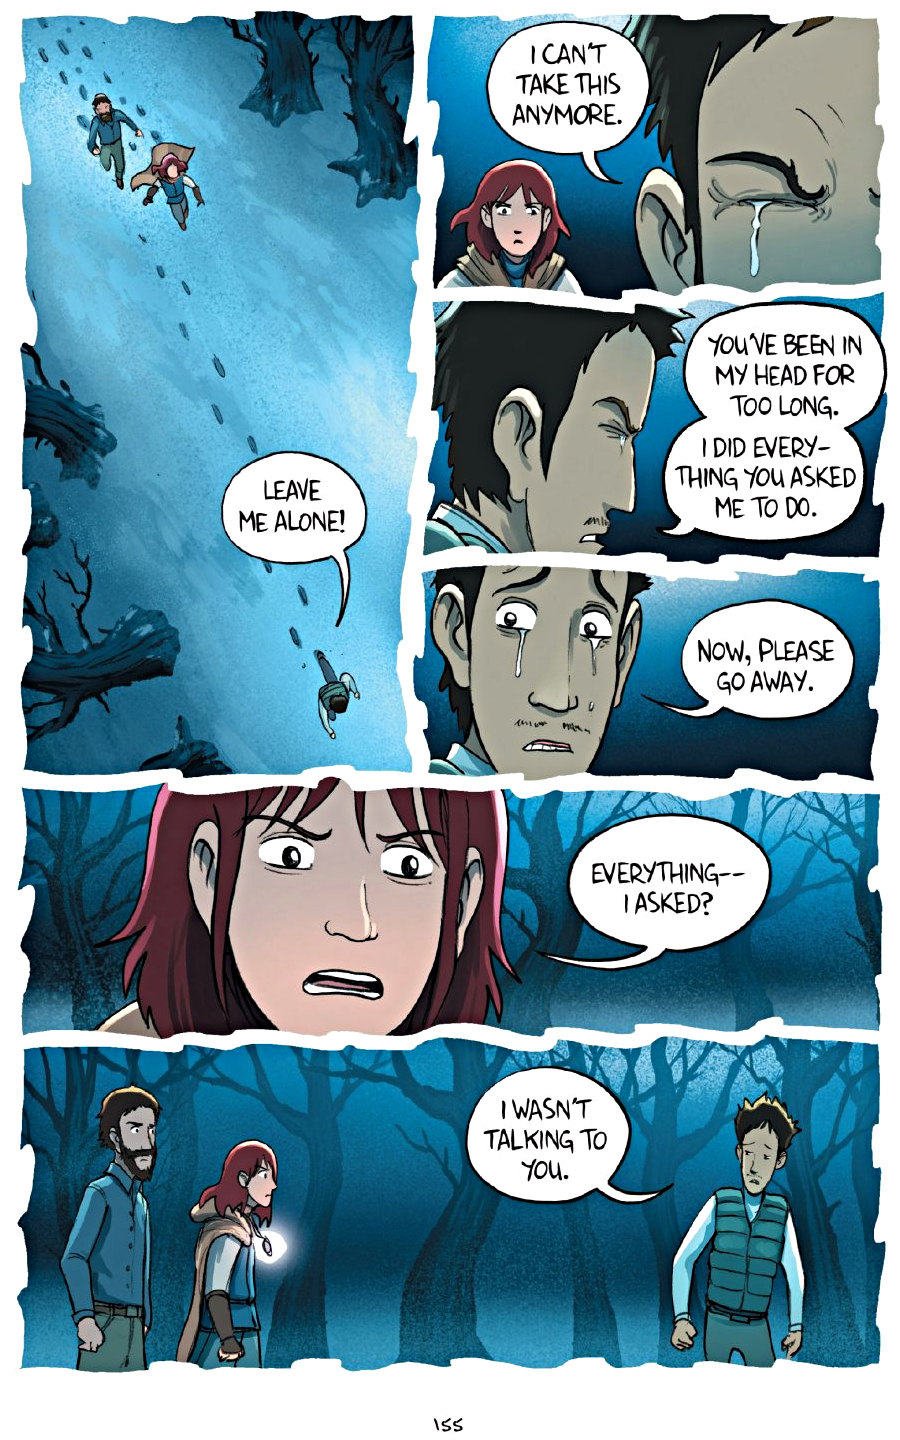 page 155 of amulet 7 firelight graphic novel